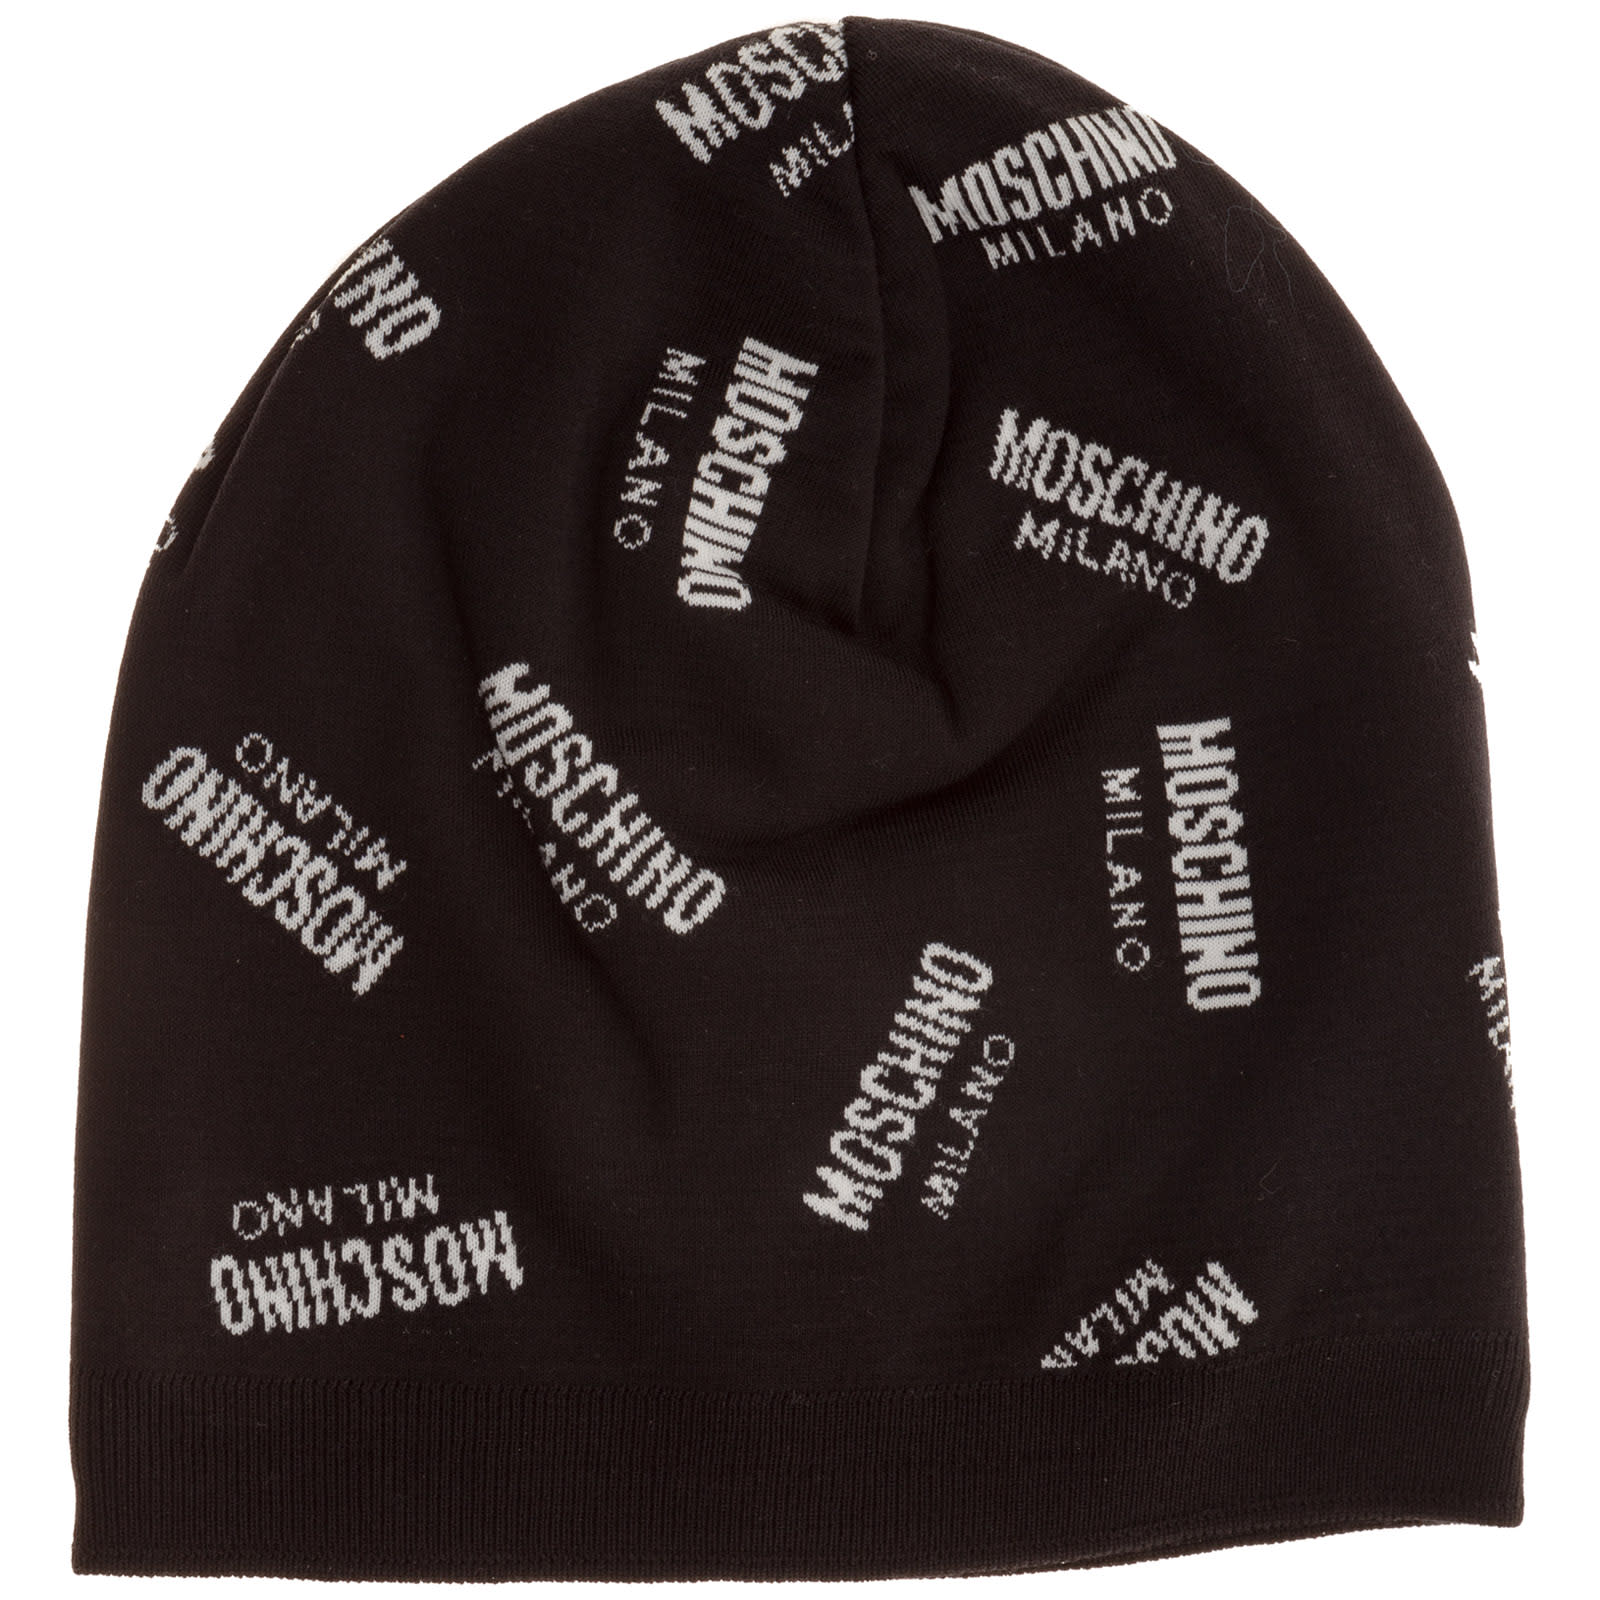 MOSCHINO DOUBLE QUESTION MARK BEANIE,M525060043016